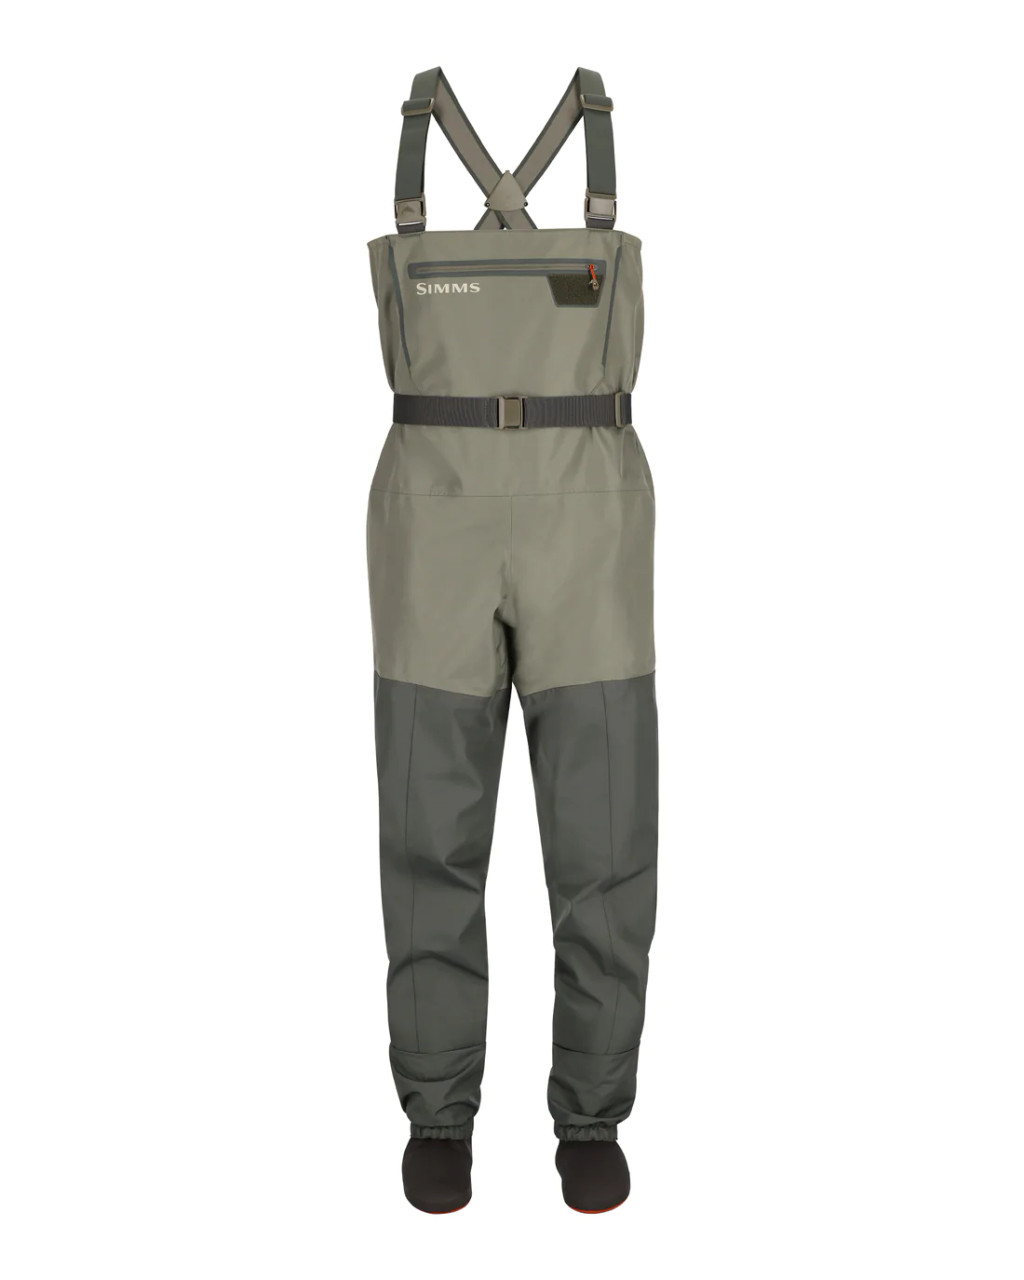 Fly Fishing Hunting Chest Waders Waterproof Stocking Foot Wader Pants with  Boots | eBay